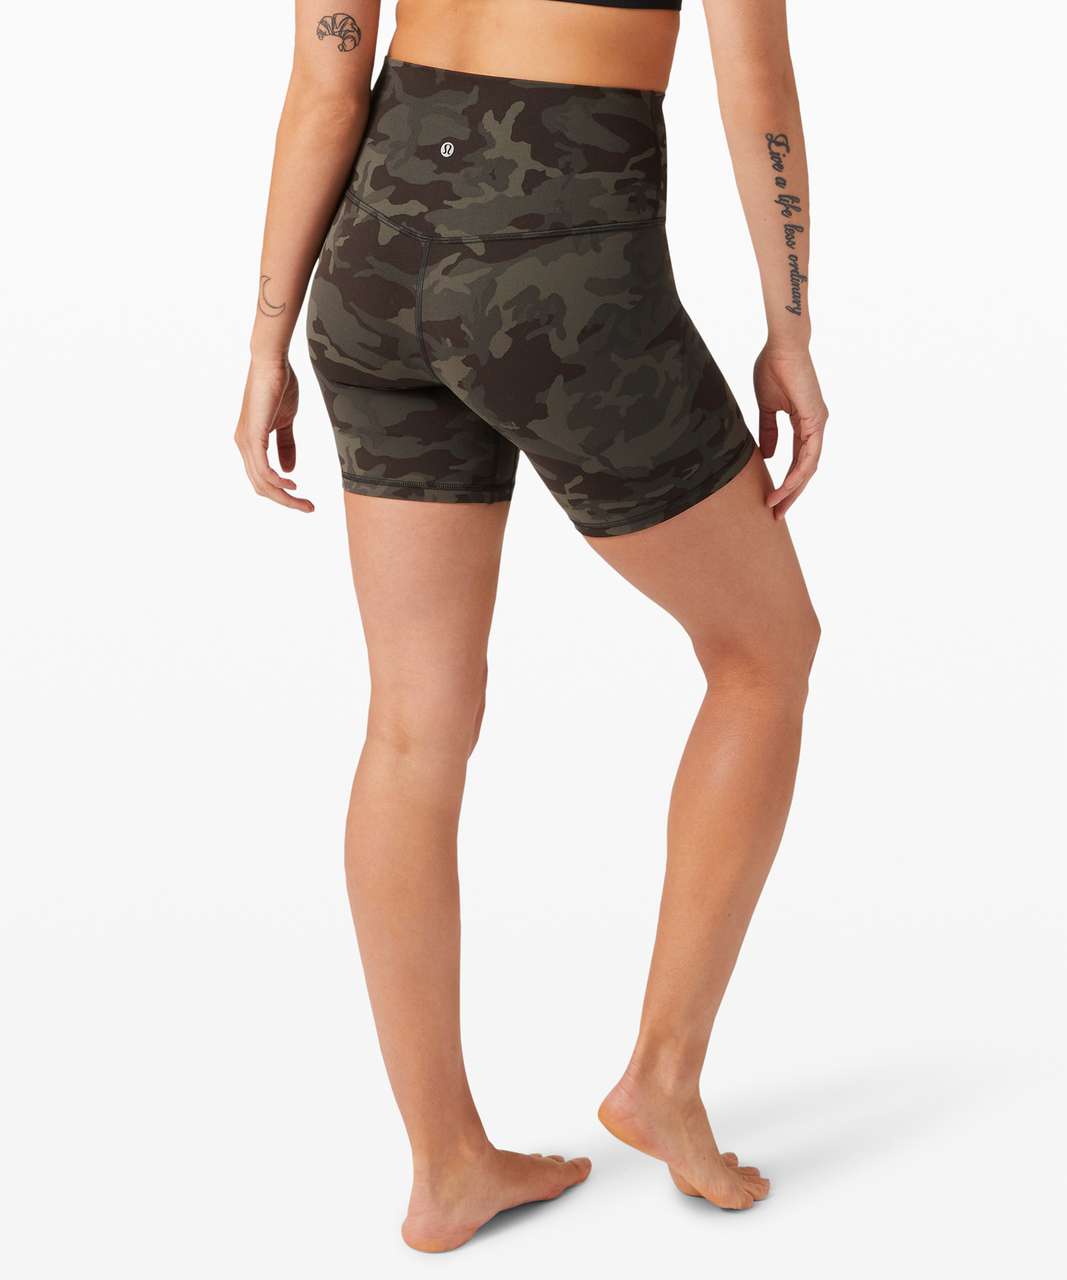 Lululemon Speed Up Short High-rise *2.5 In Incognito Camo Multi Gator Green/black